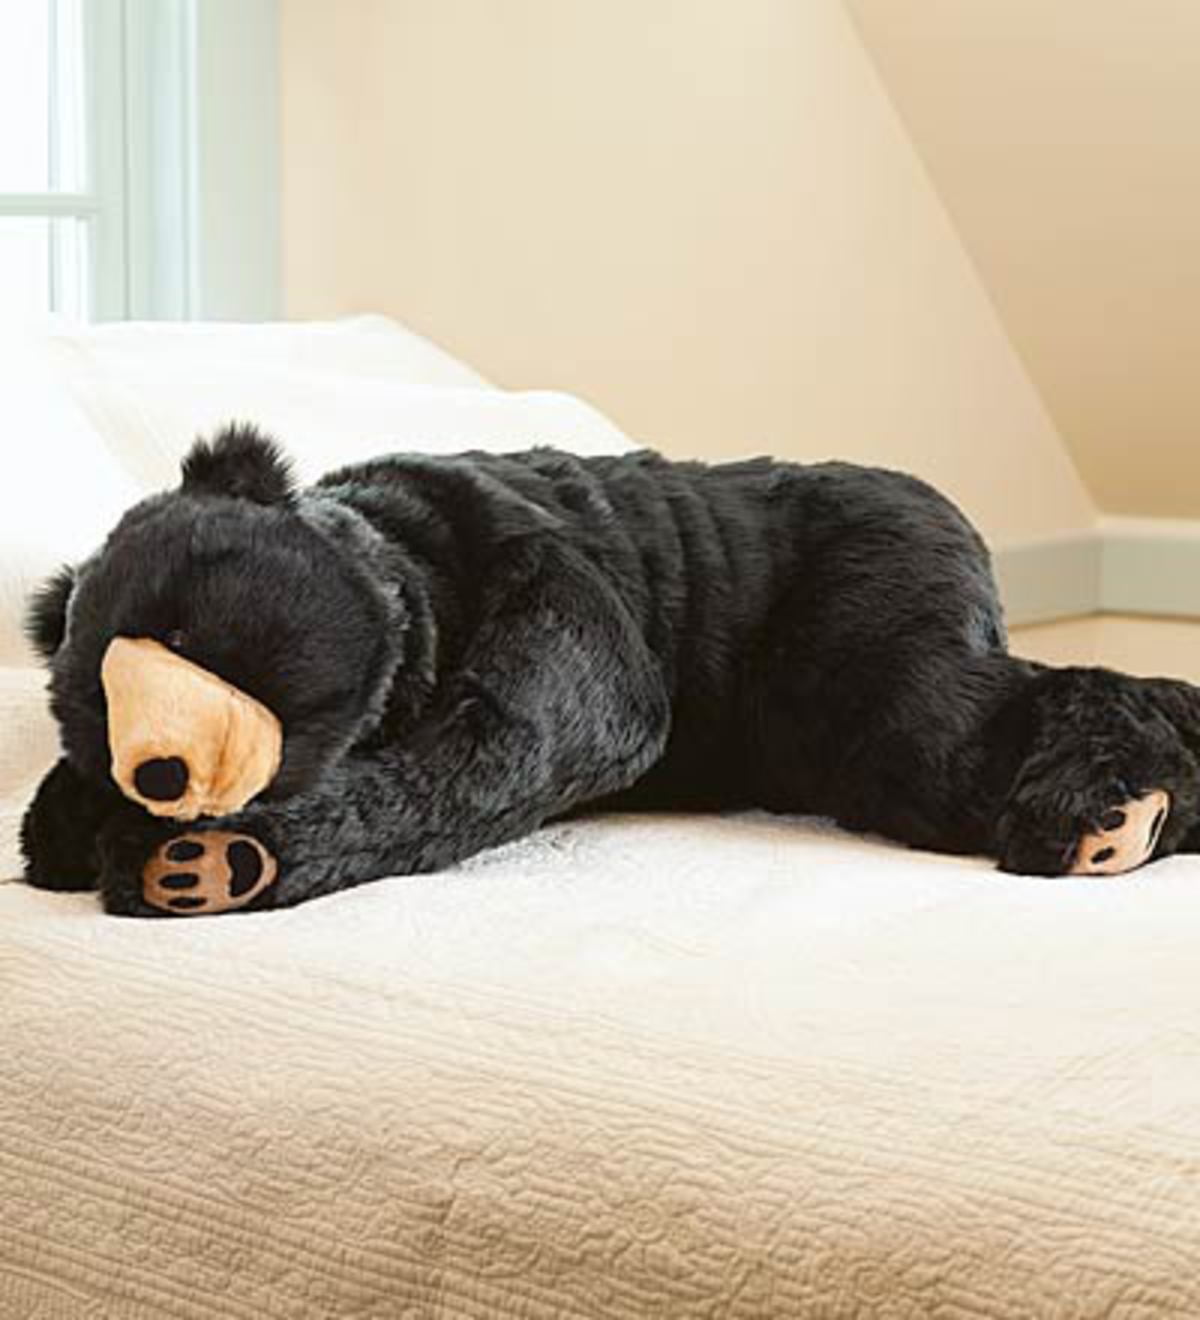 Super Soft Bear Hug Body Pillow with Realistic Features, Black Bear